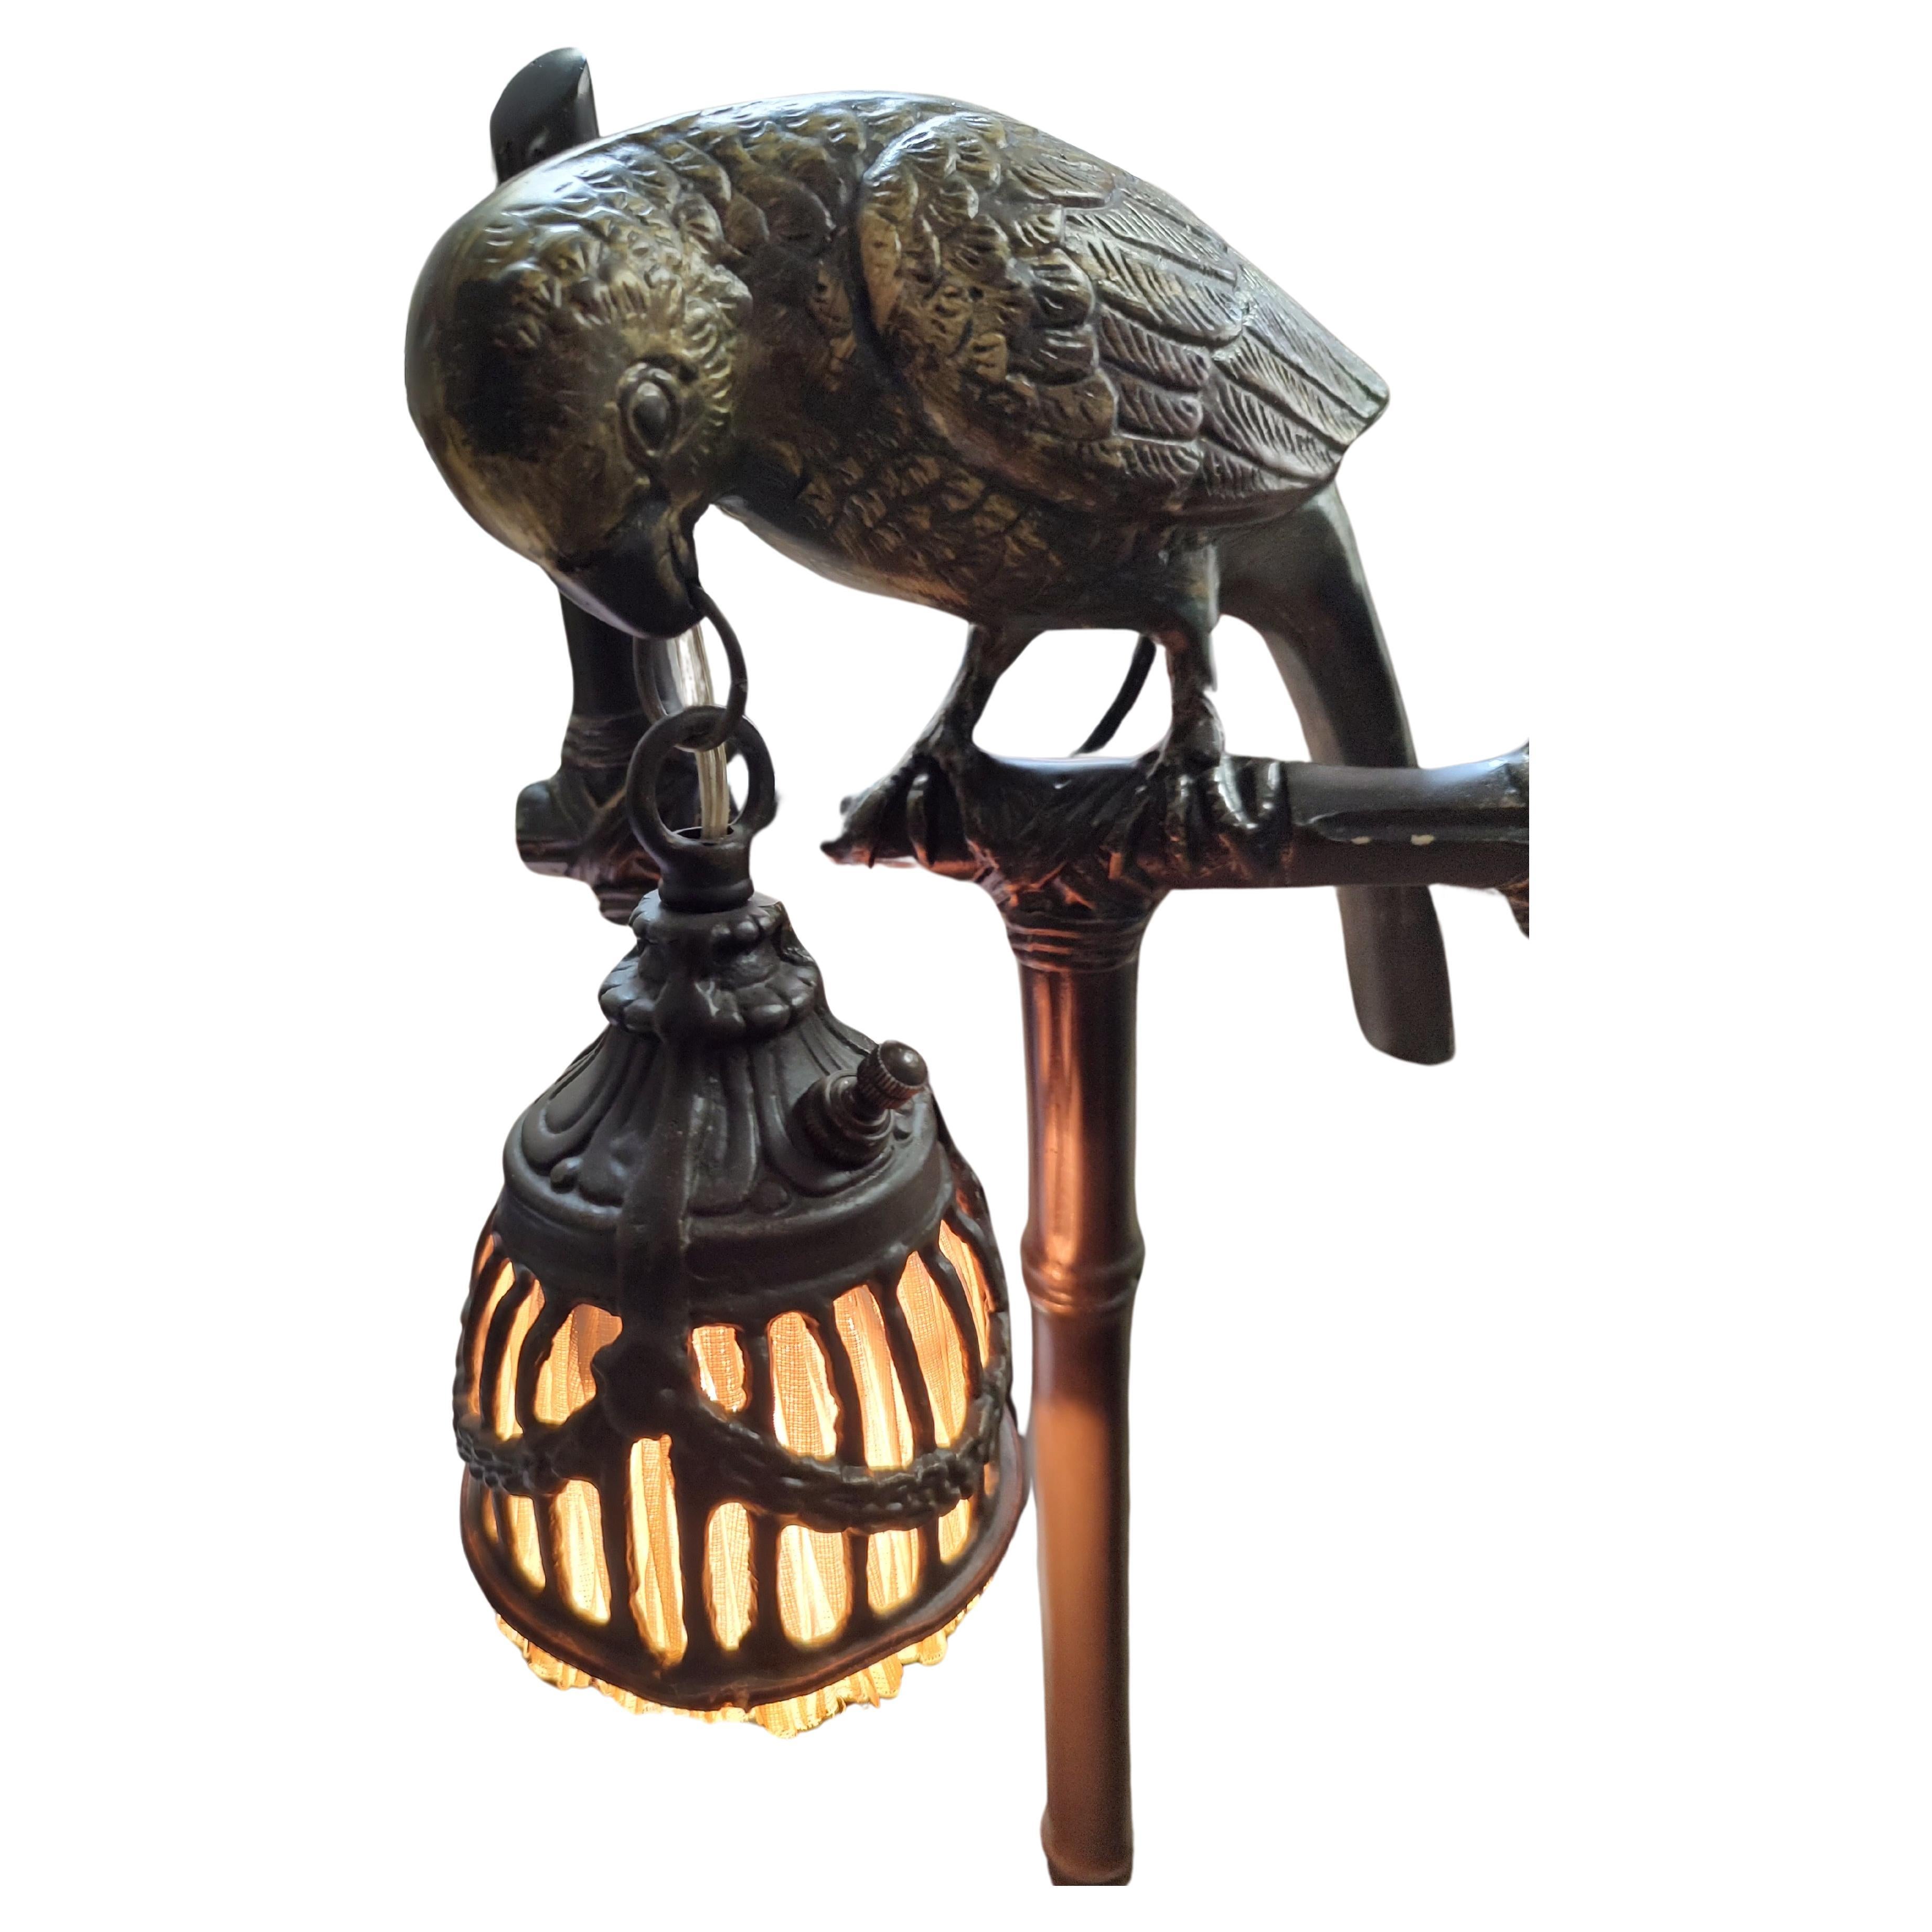 Neoclassical Revival Mid Century Neoclassical Floor Lamp Perched Bird Holding Light Frederick Cooper For Sale